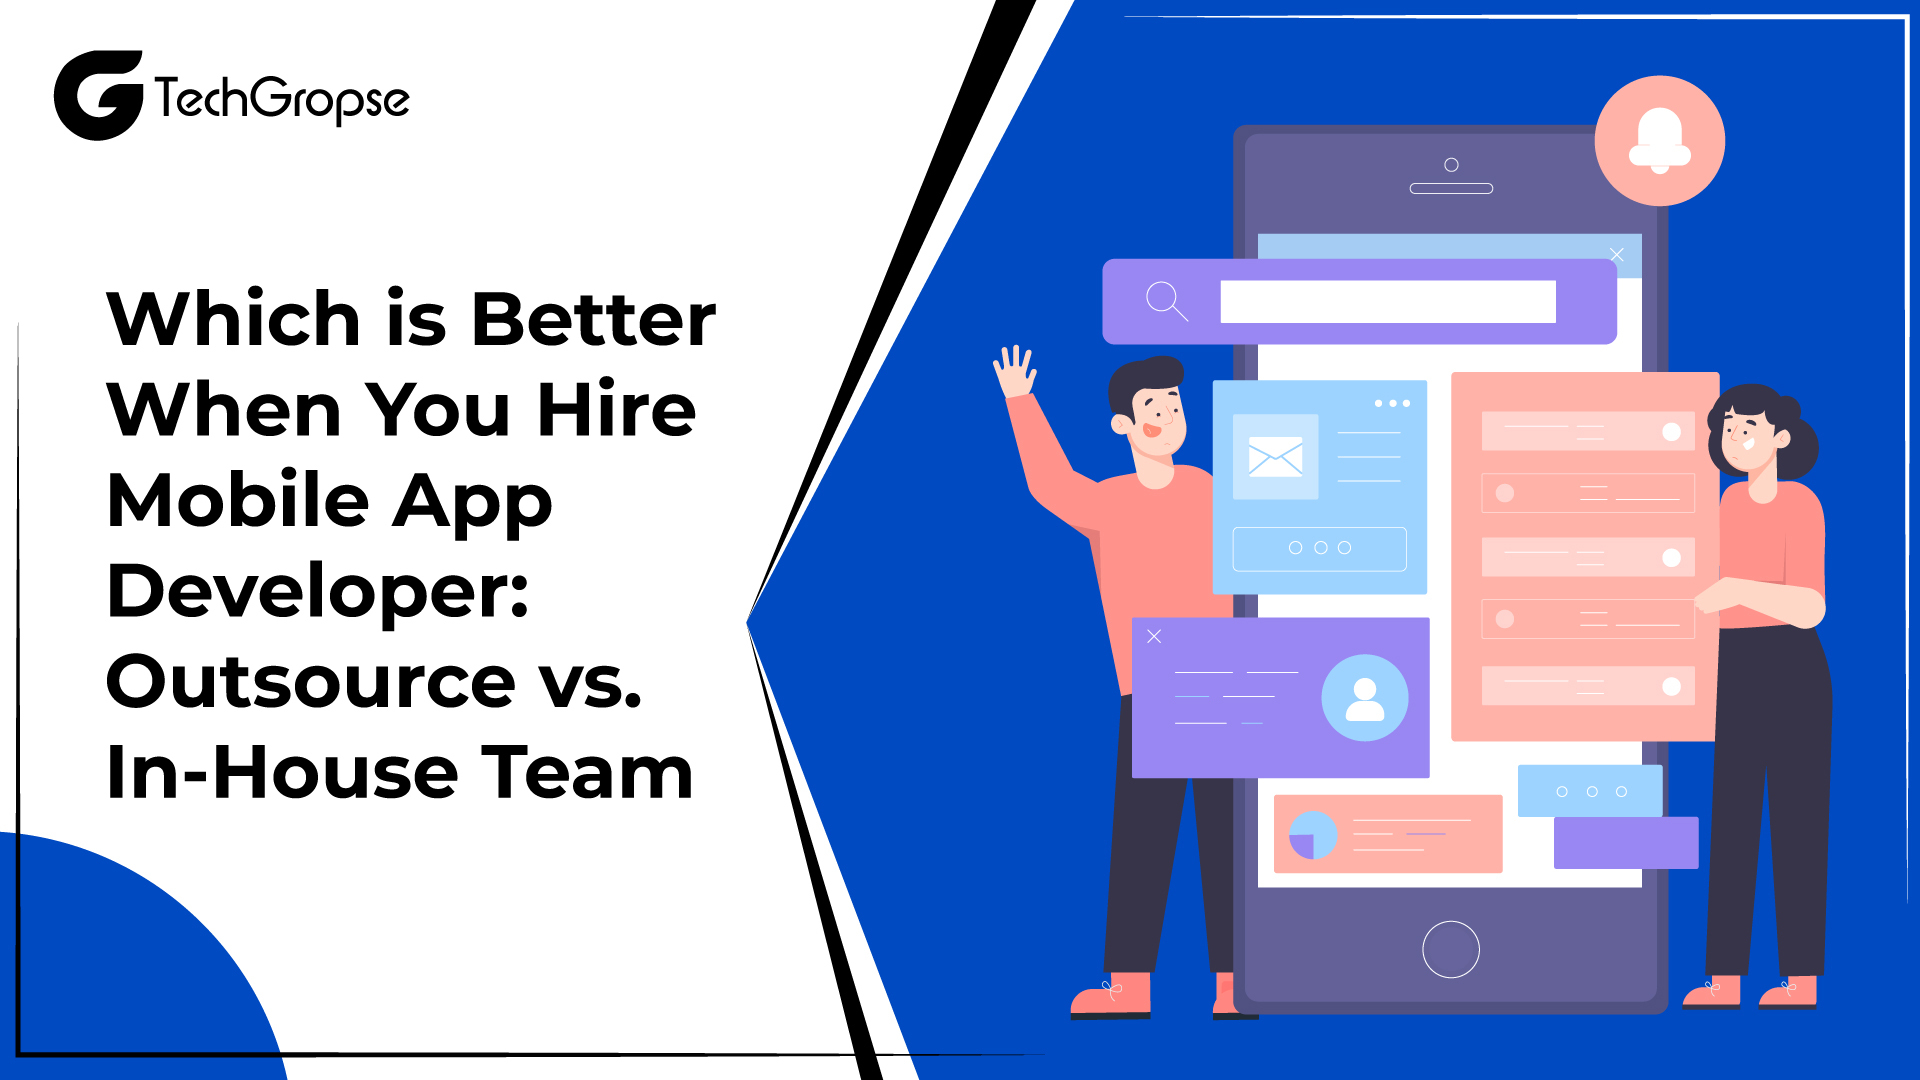 Which is Better When You Hire Mobile App Developer: Outsource vs. In-House Team